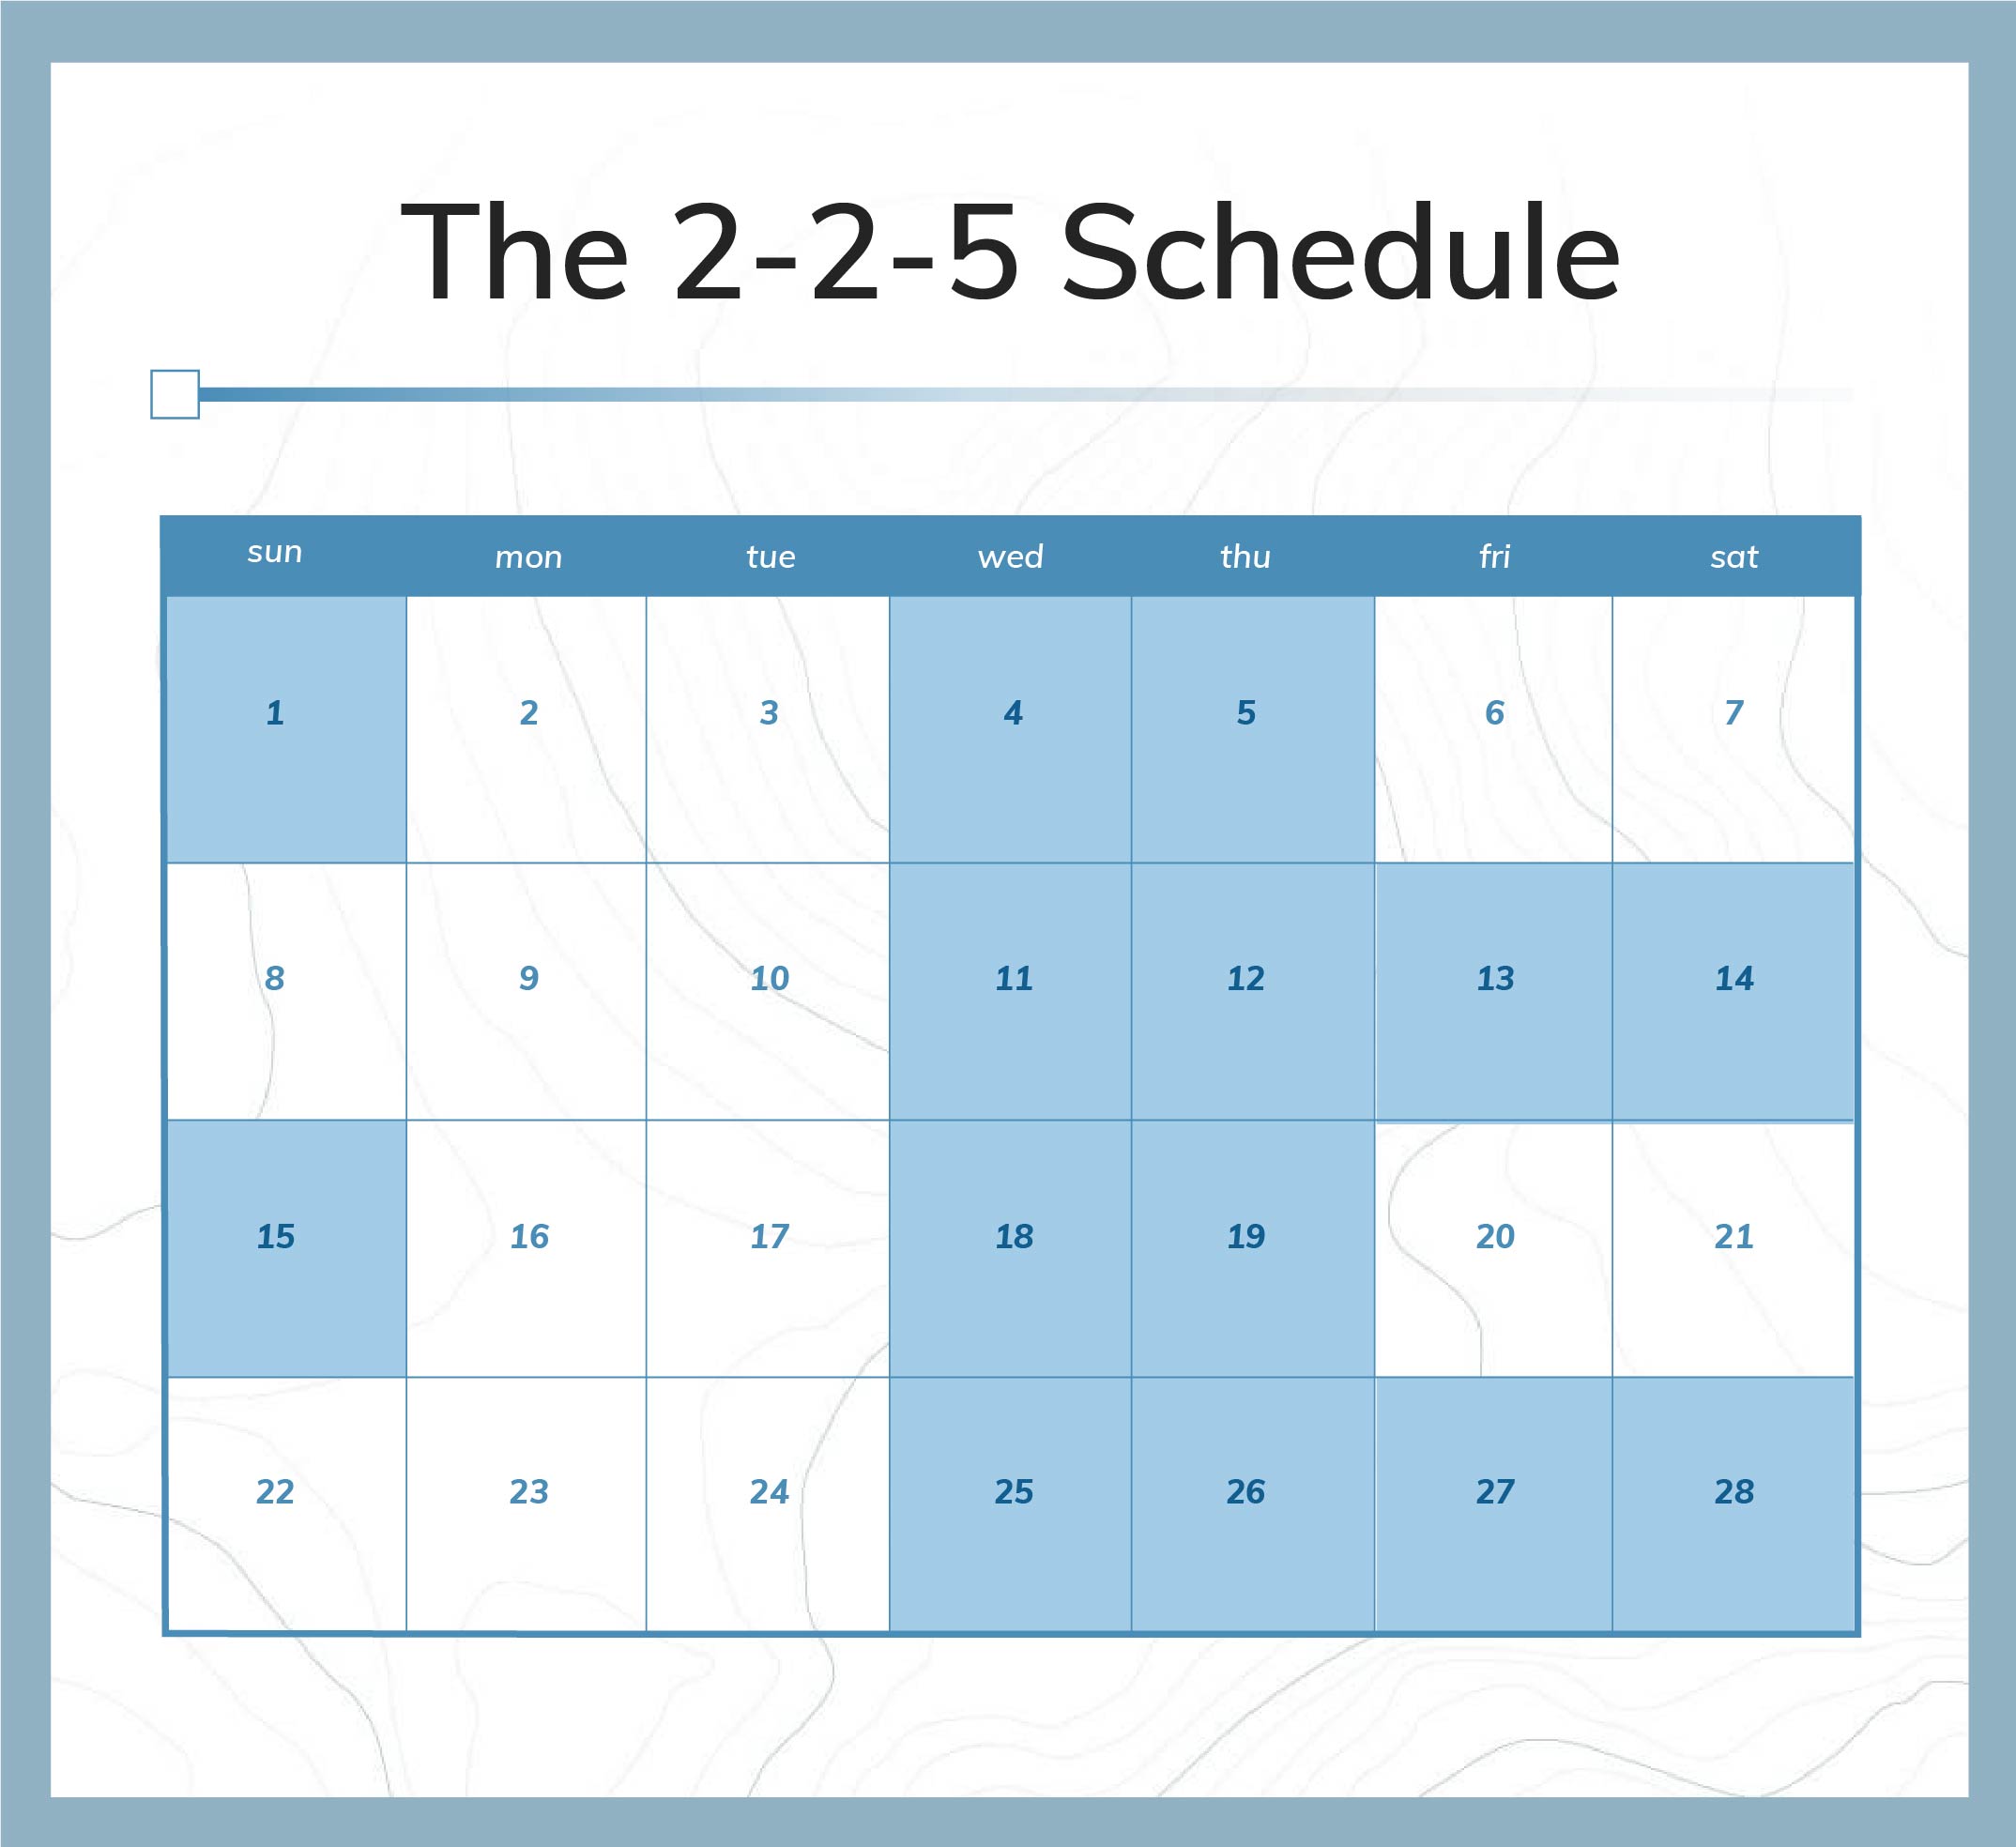 The 2-2-5 Schedule